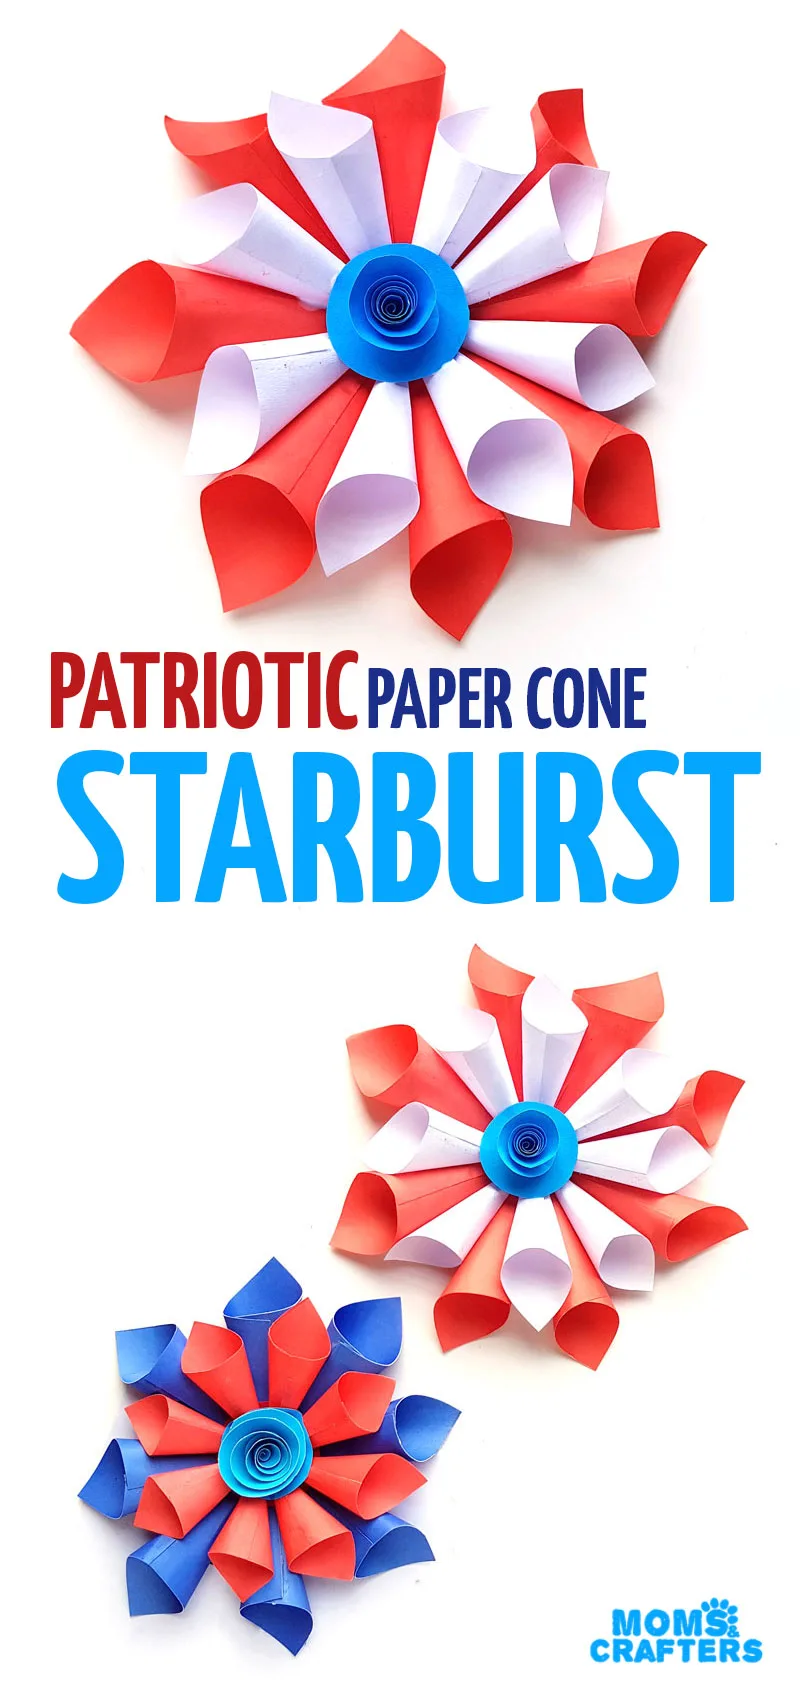 Make some DIY paper 4th of July Decorations and patriotic paper cone starburst wreath! These red white and blue paper decorations are perfect for Independence day picnics and fun crafts for eveyone.